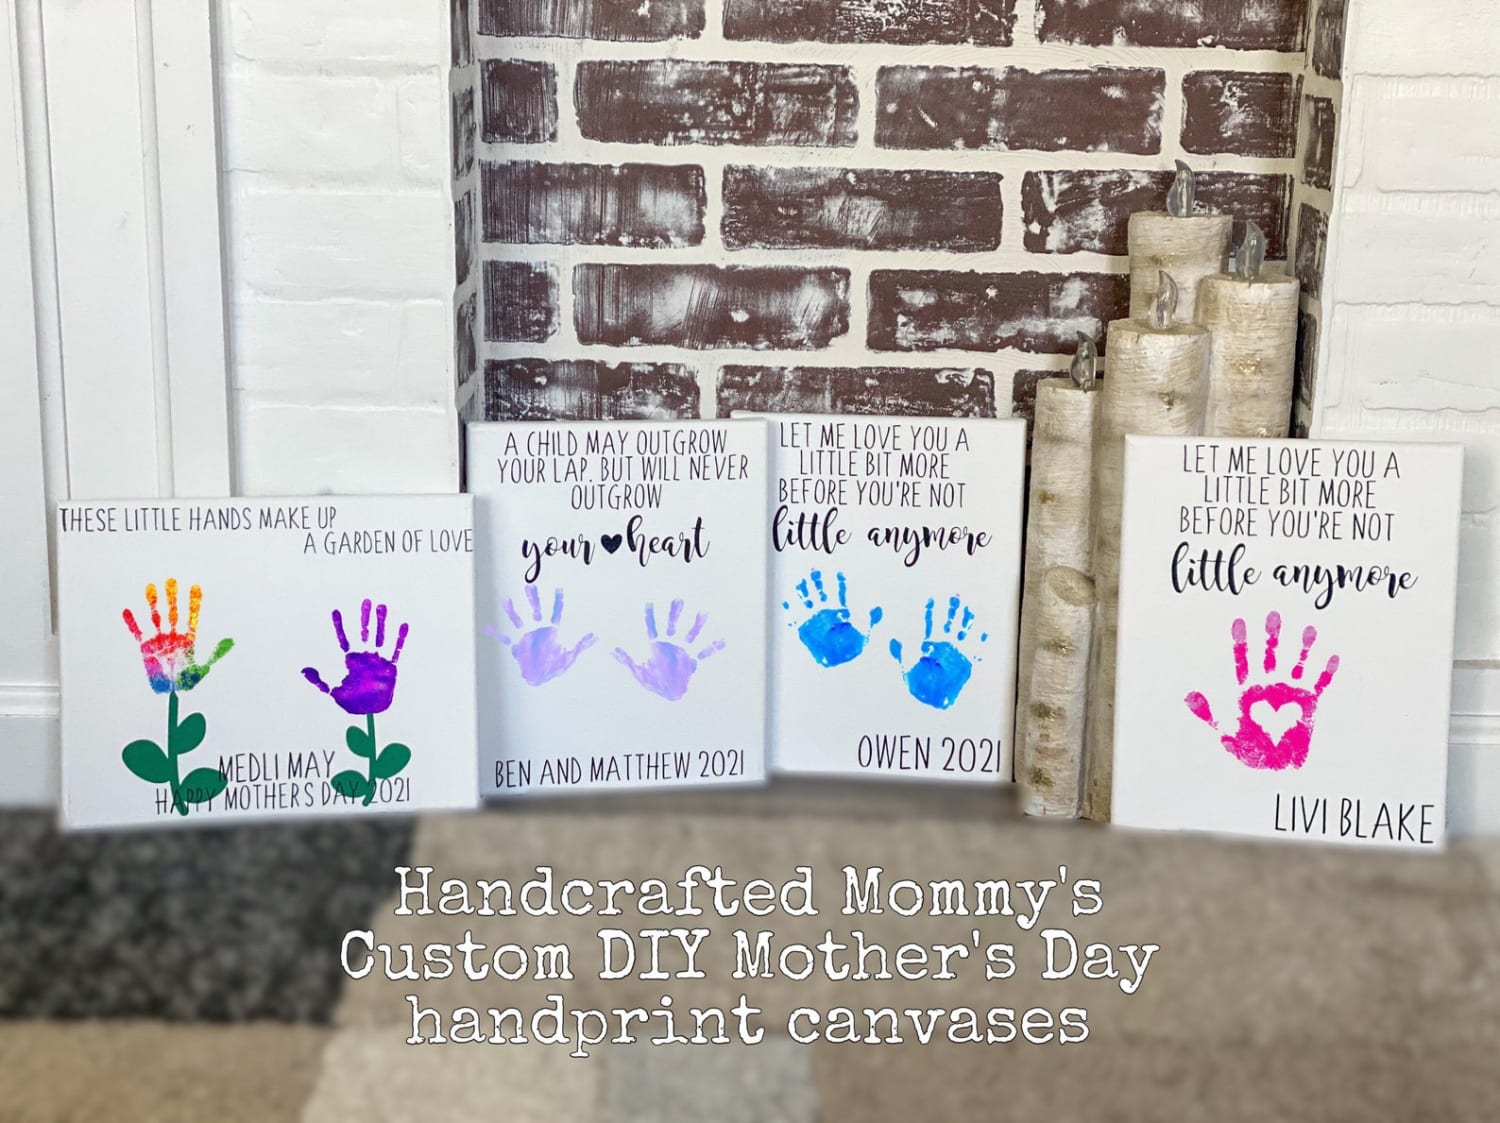 Personalized Mom Birthday Gift. Mothers Day Gift Flower Handprint